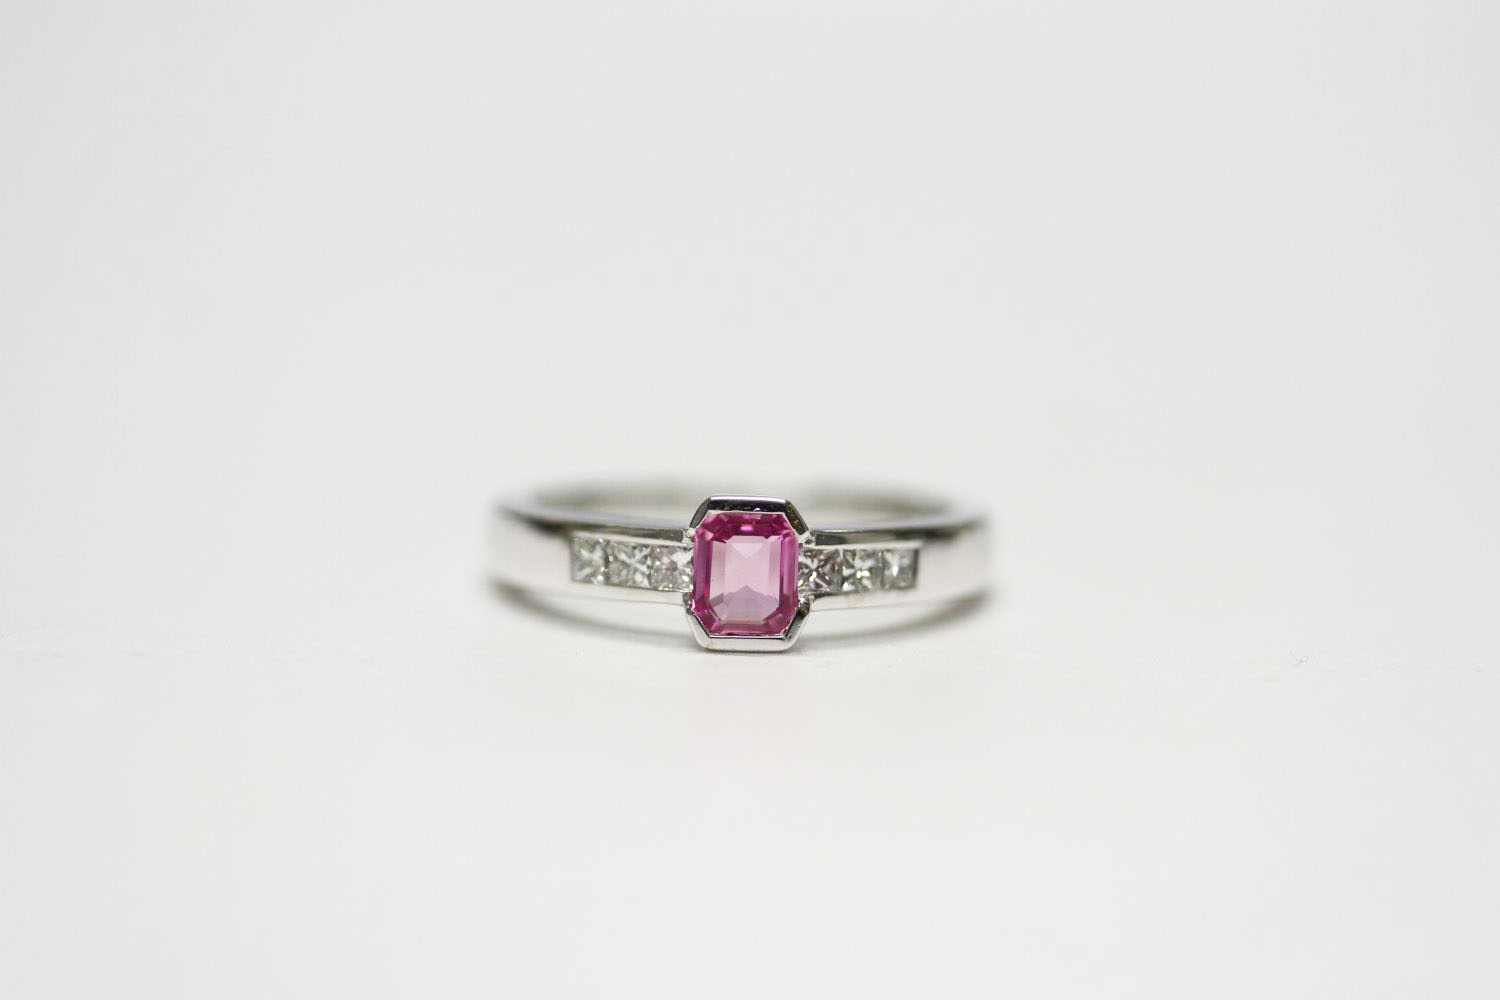 18ct white gold semi-rubover-set pink sapphire and channel-set diamond ring. Emerald-cut pink